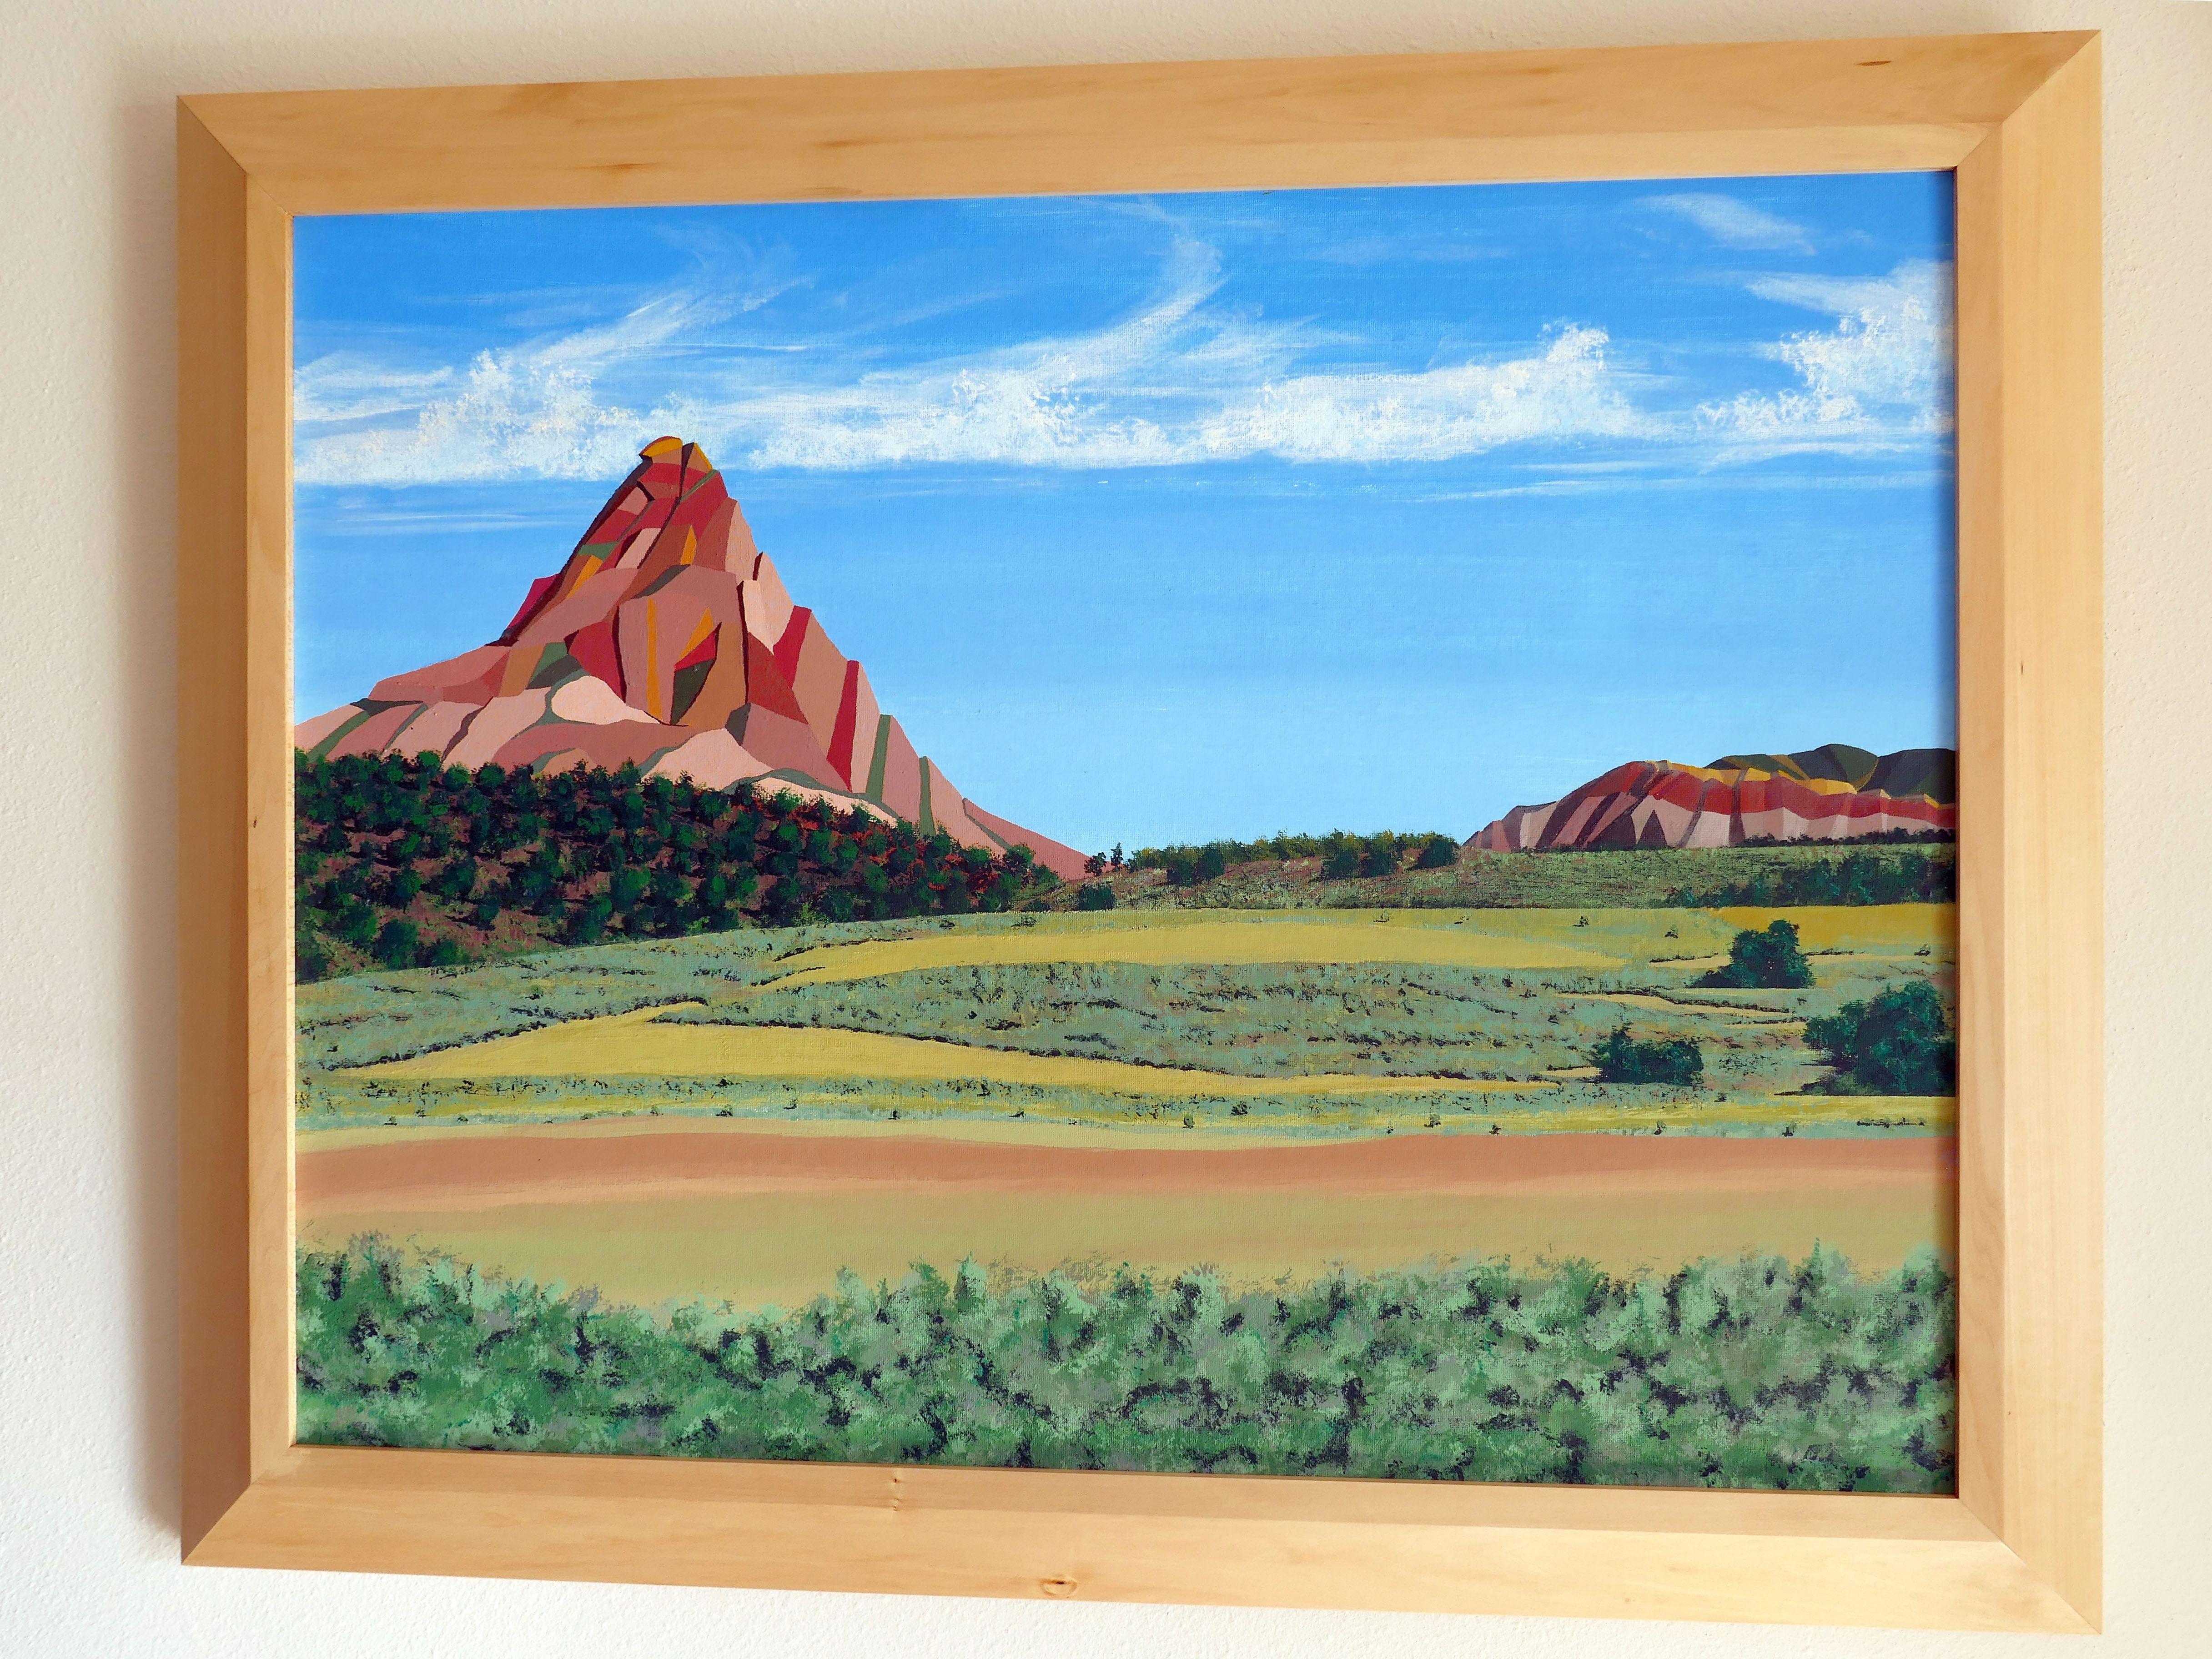 We were driving up Kolob Terrace Road and I had to take a photo of the view in front of us. So I asked we stop, got out of the car, and snapped said photo. I loved the landscape to a point that I decided to invest the time and effort to paint it.